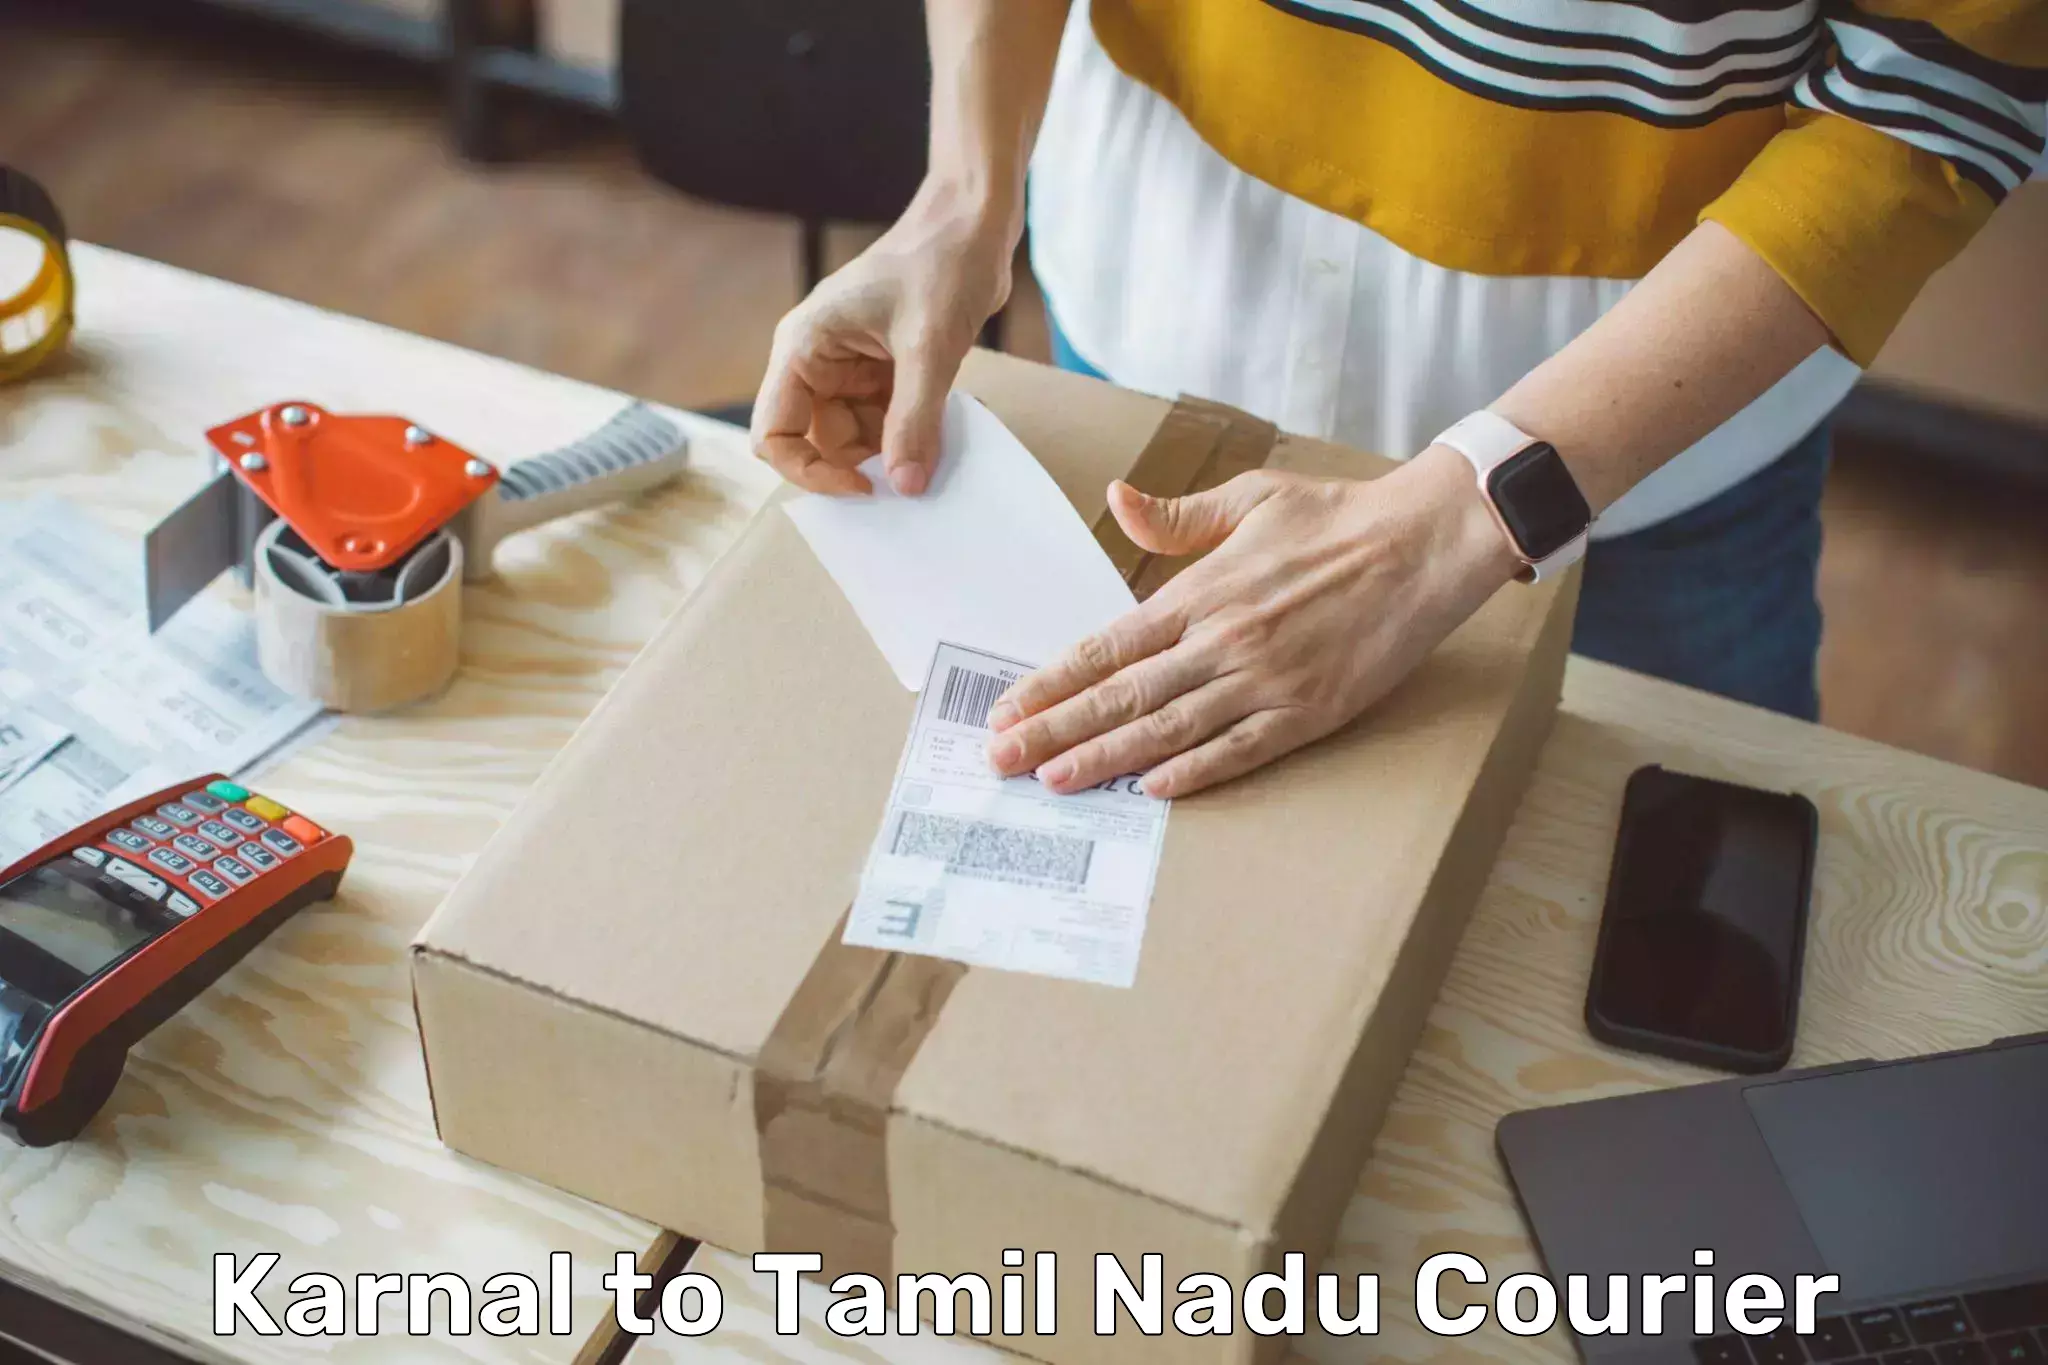 Package delivery network Karnal to Tiruchirappalli